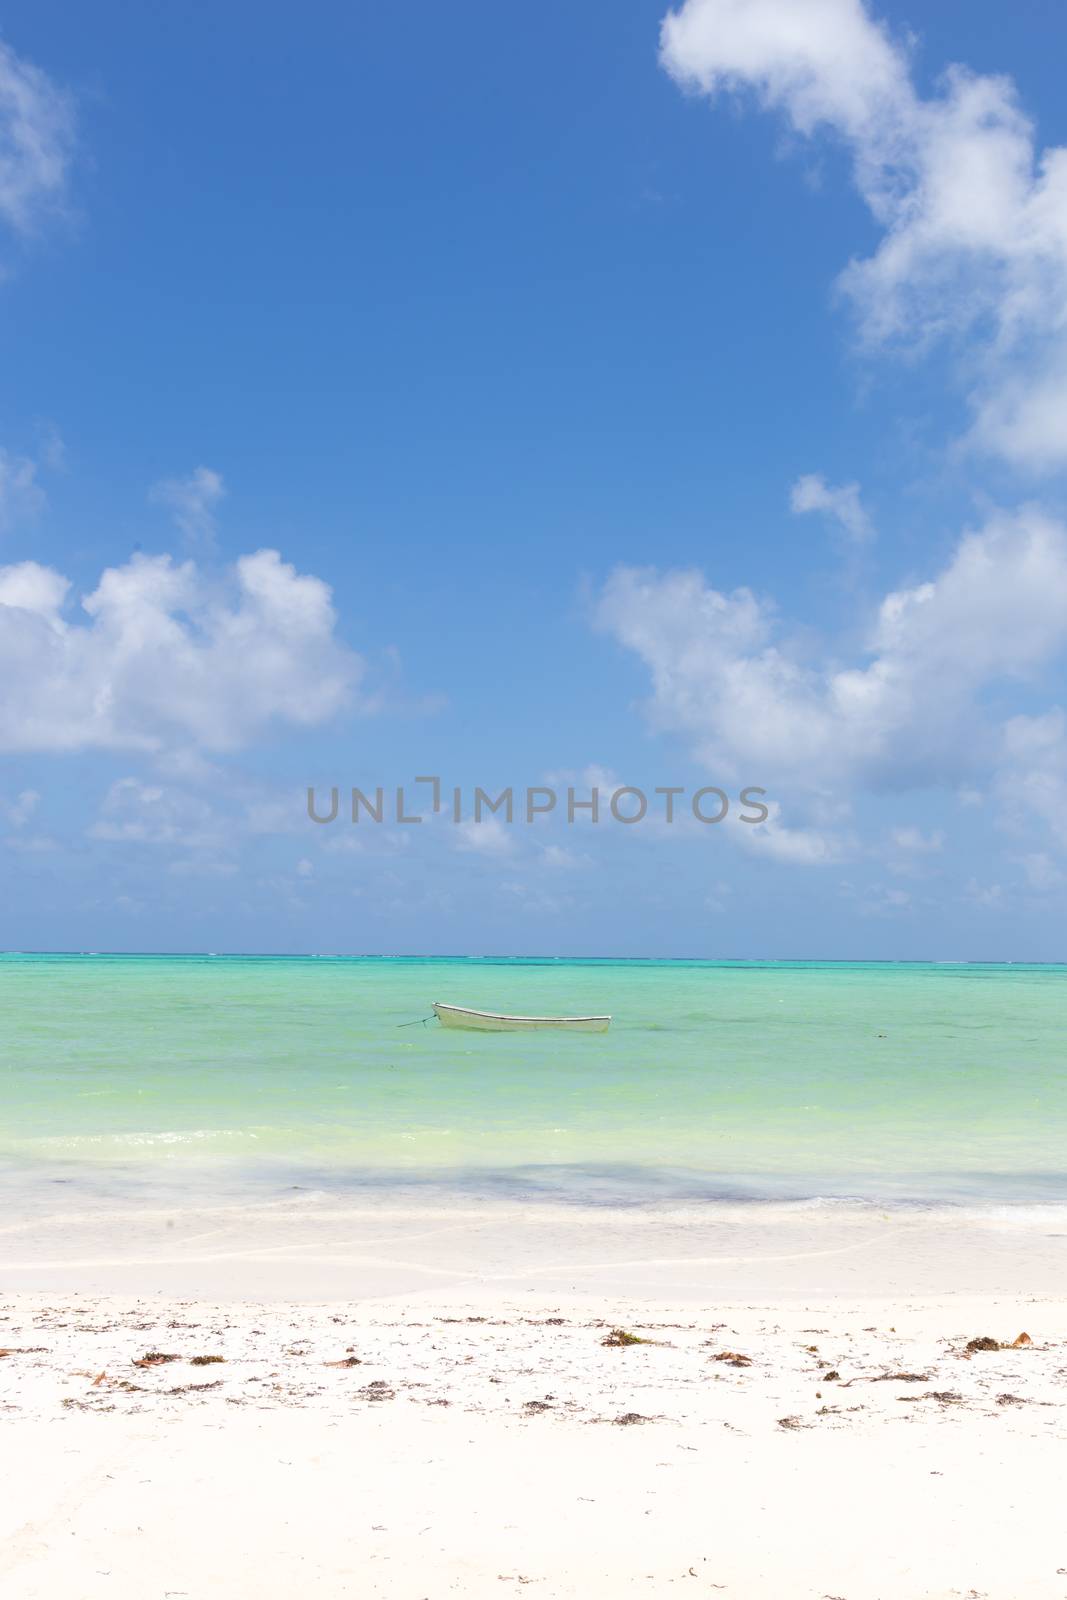 Fishing boat on picture perfect white sandy beach with turquoise blue sea, Paje, Zanzibar, Tanzania. by kasto